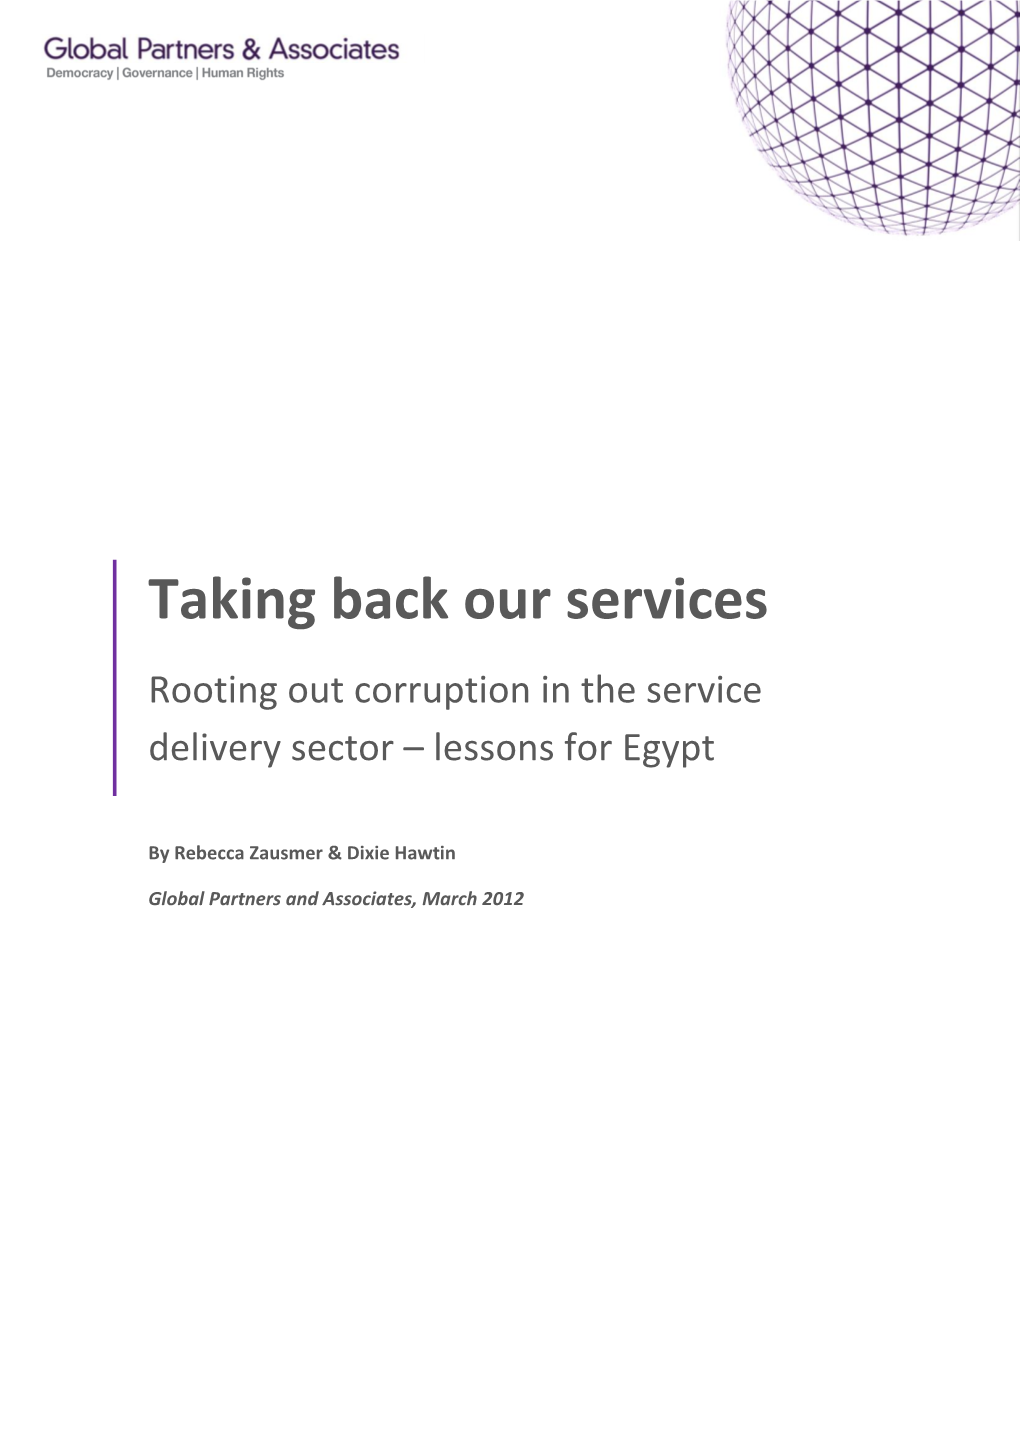 Taking Back Our Services Rooting out Corruption in the Service Delivery Sector – Lessons for Egypt